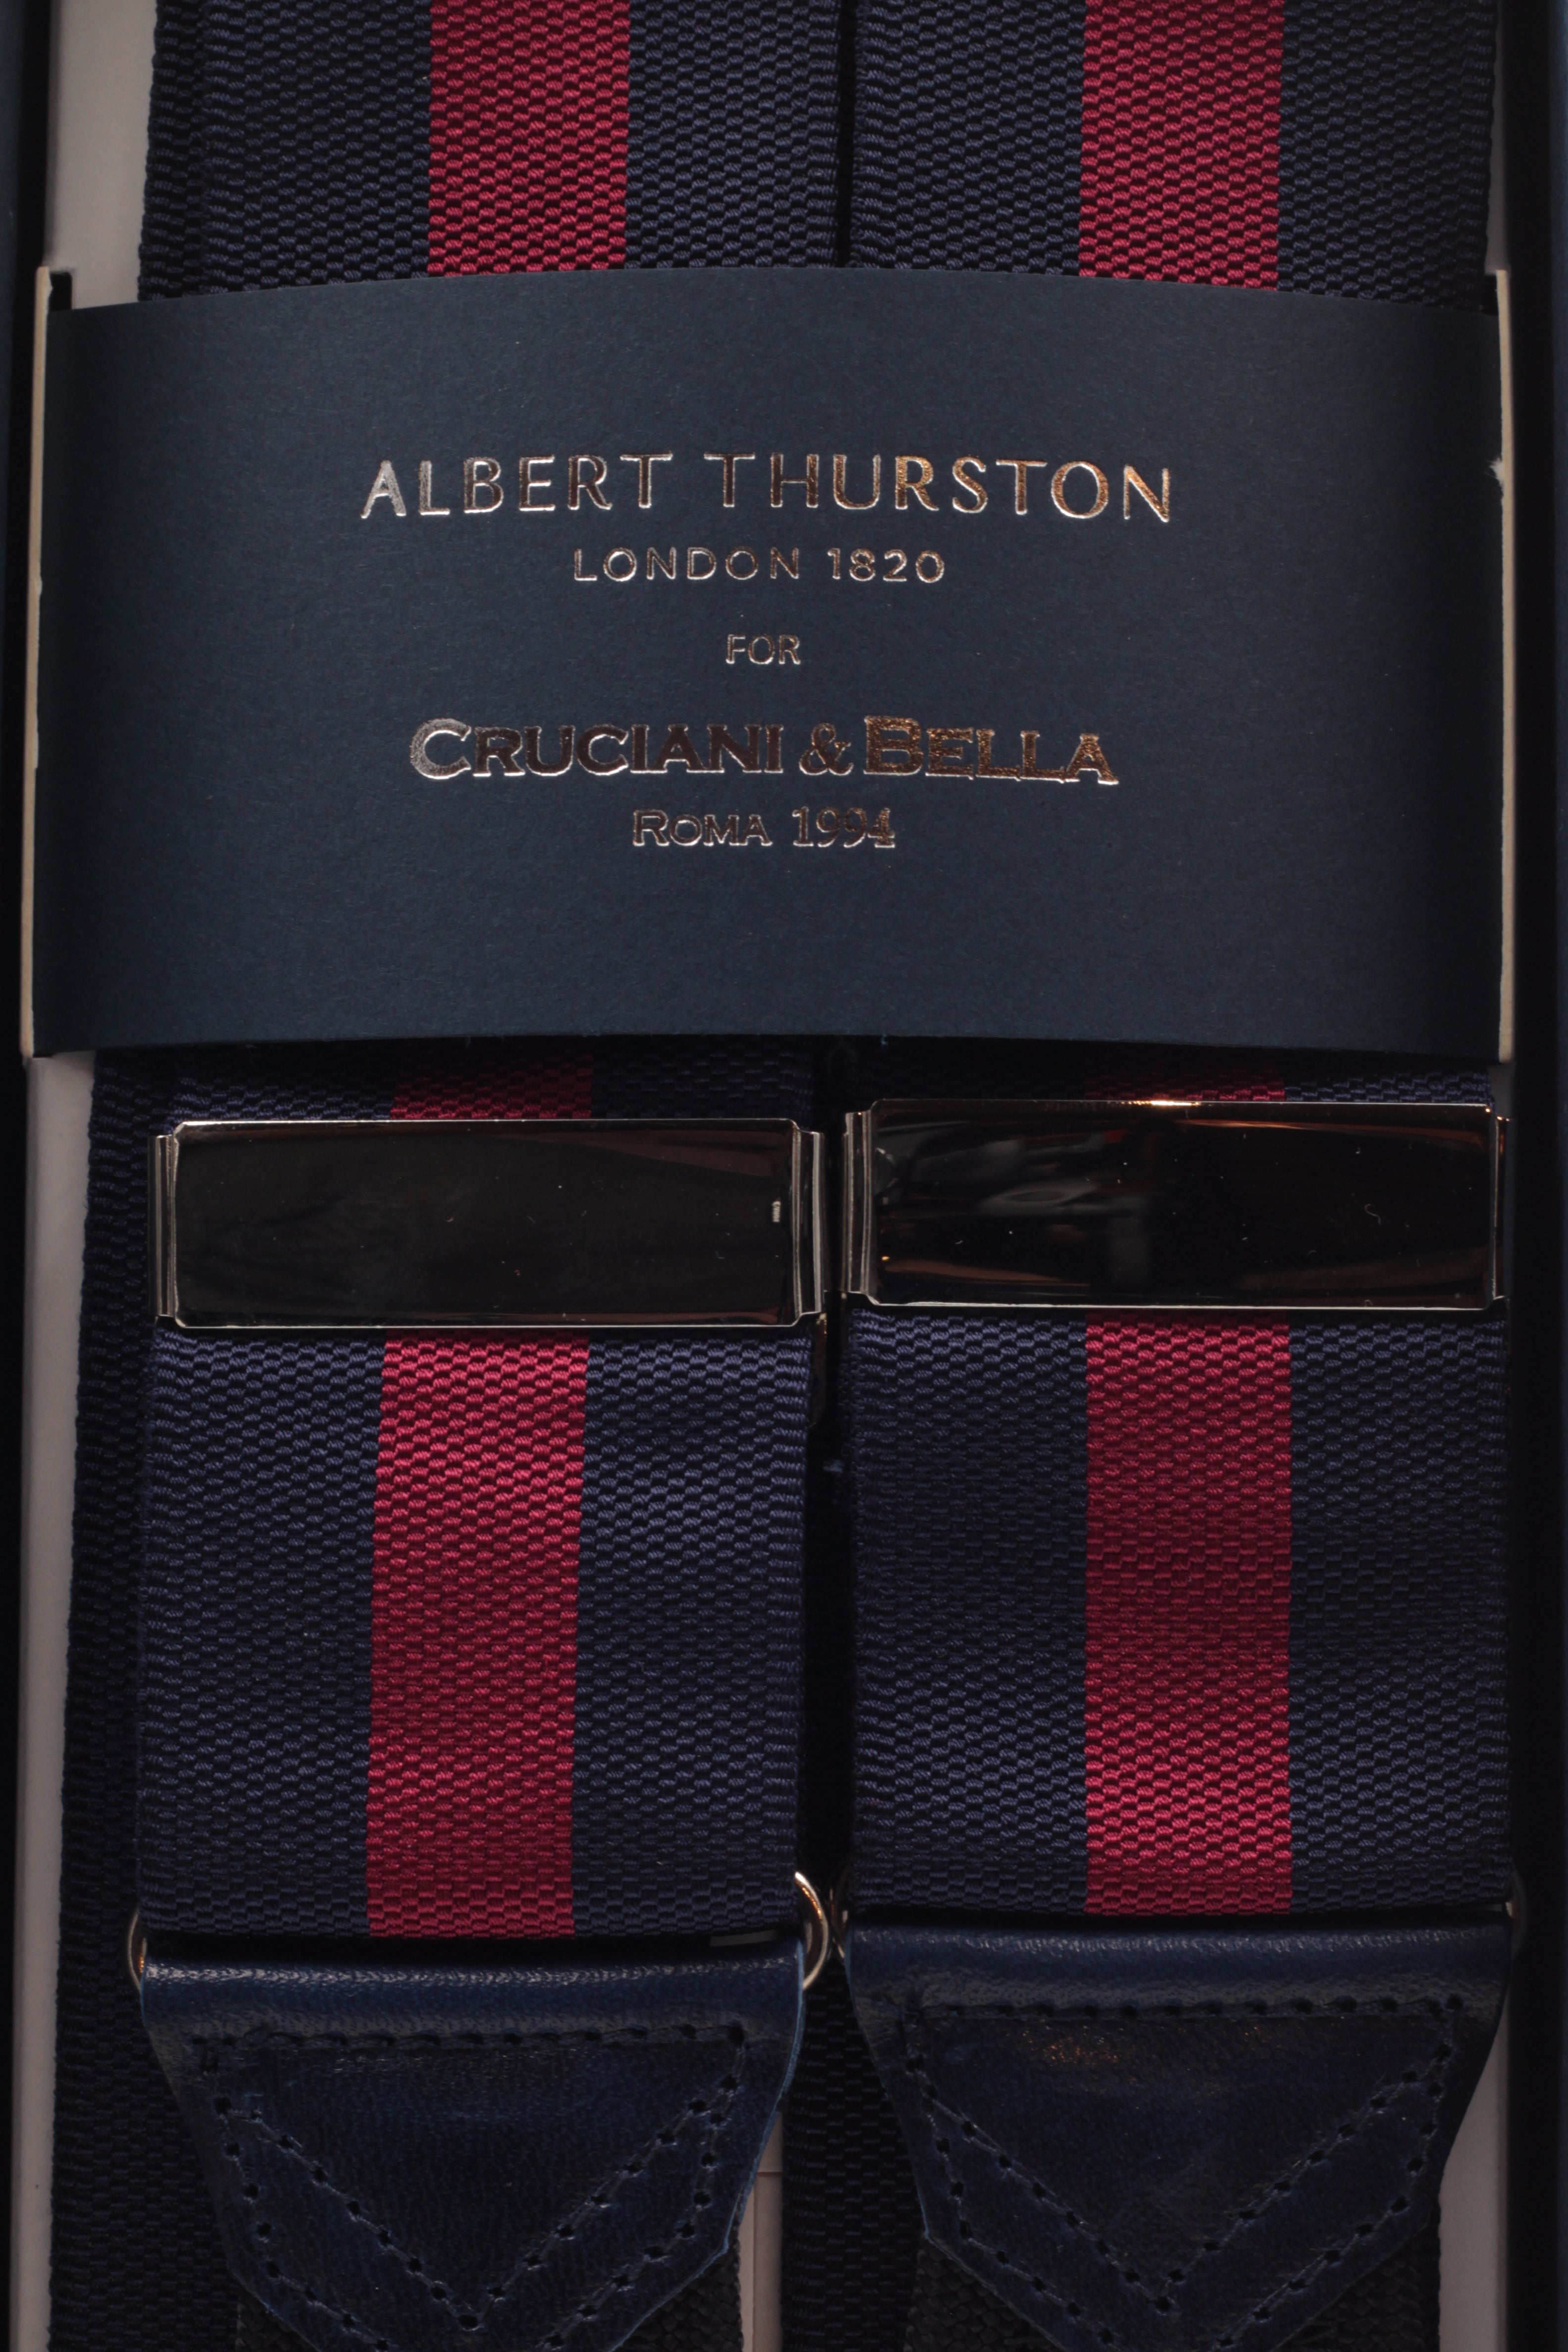 Albert Thurston for Cruciani & Bella Made in England Adjustable Sizing 40 mm Woven Barathea  Navy and Red stripes Braces Braid ends Y-Shaped Nickel Fittings